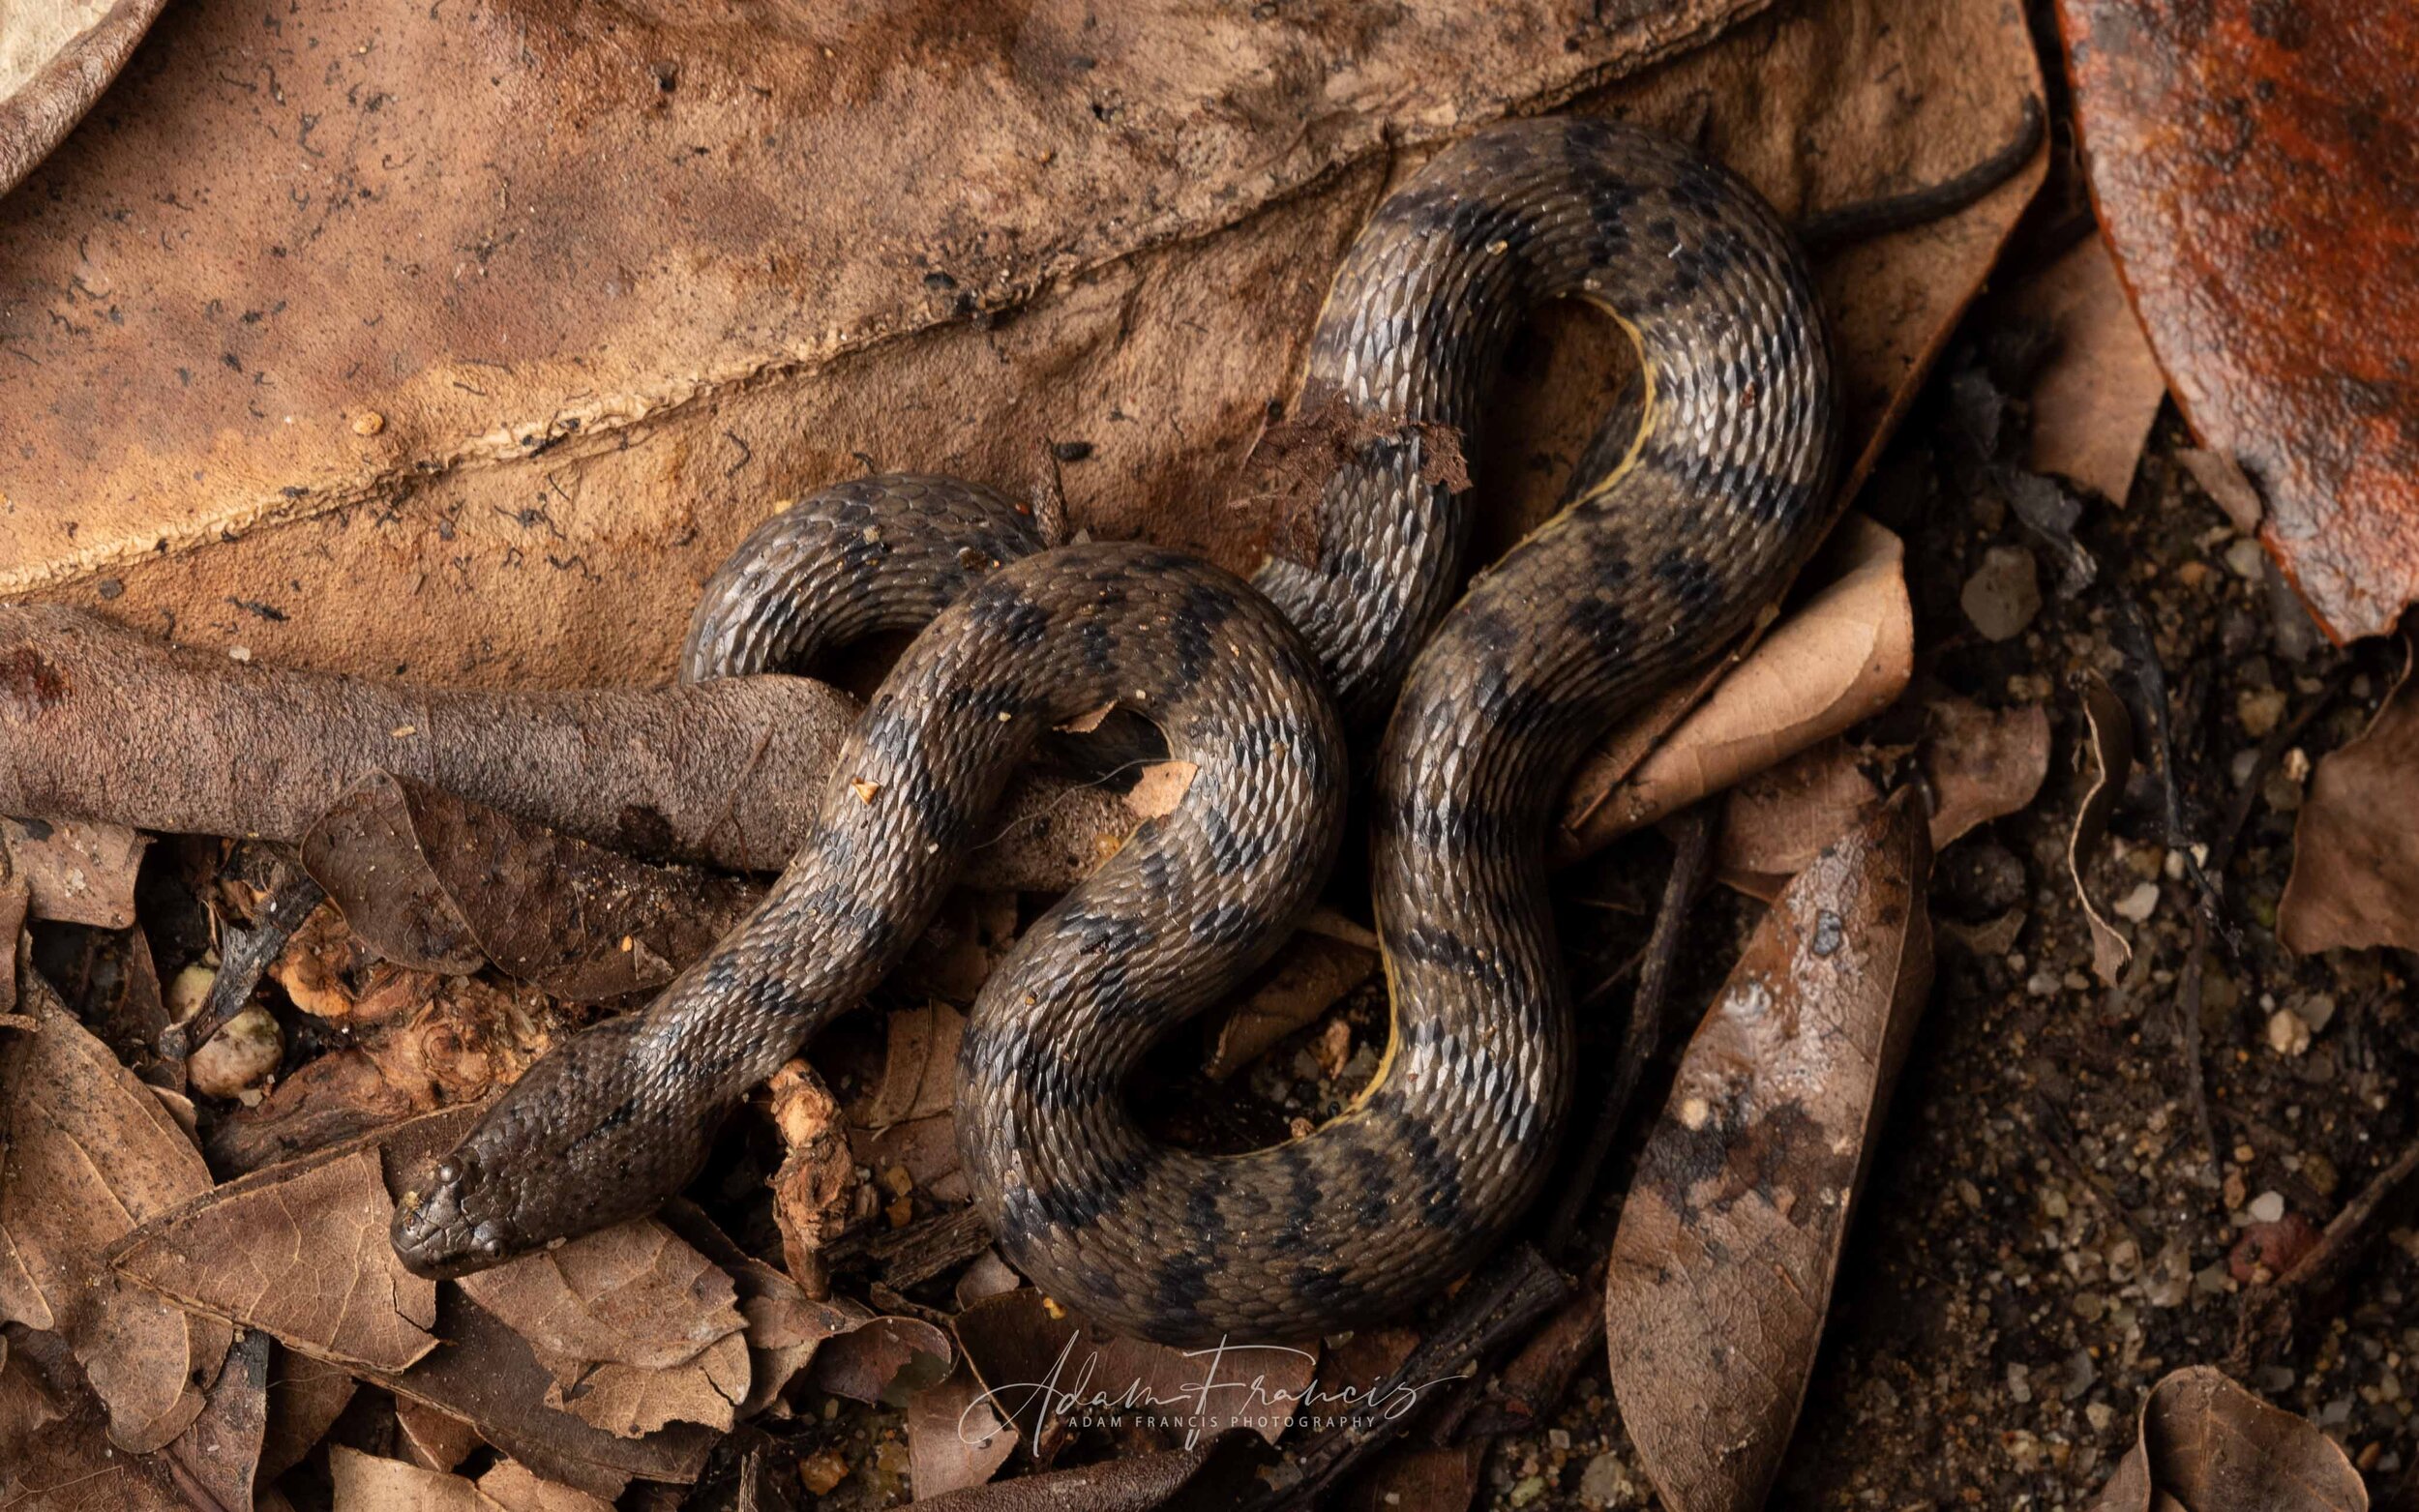 Dog-faced Water Snake - Cerberus rynchops